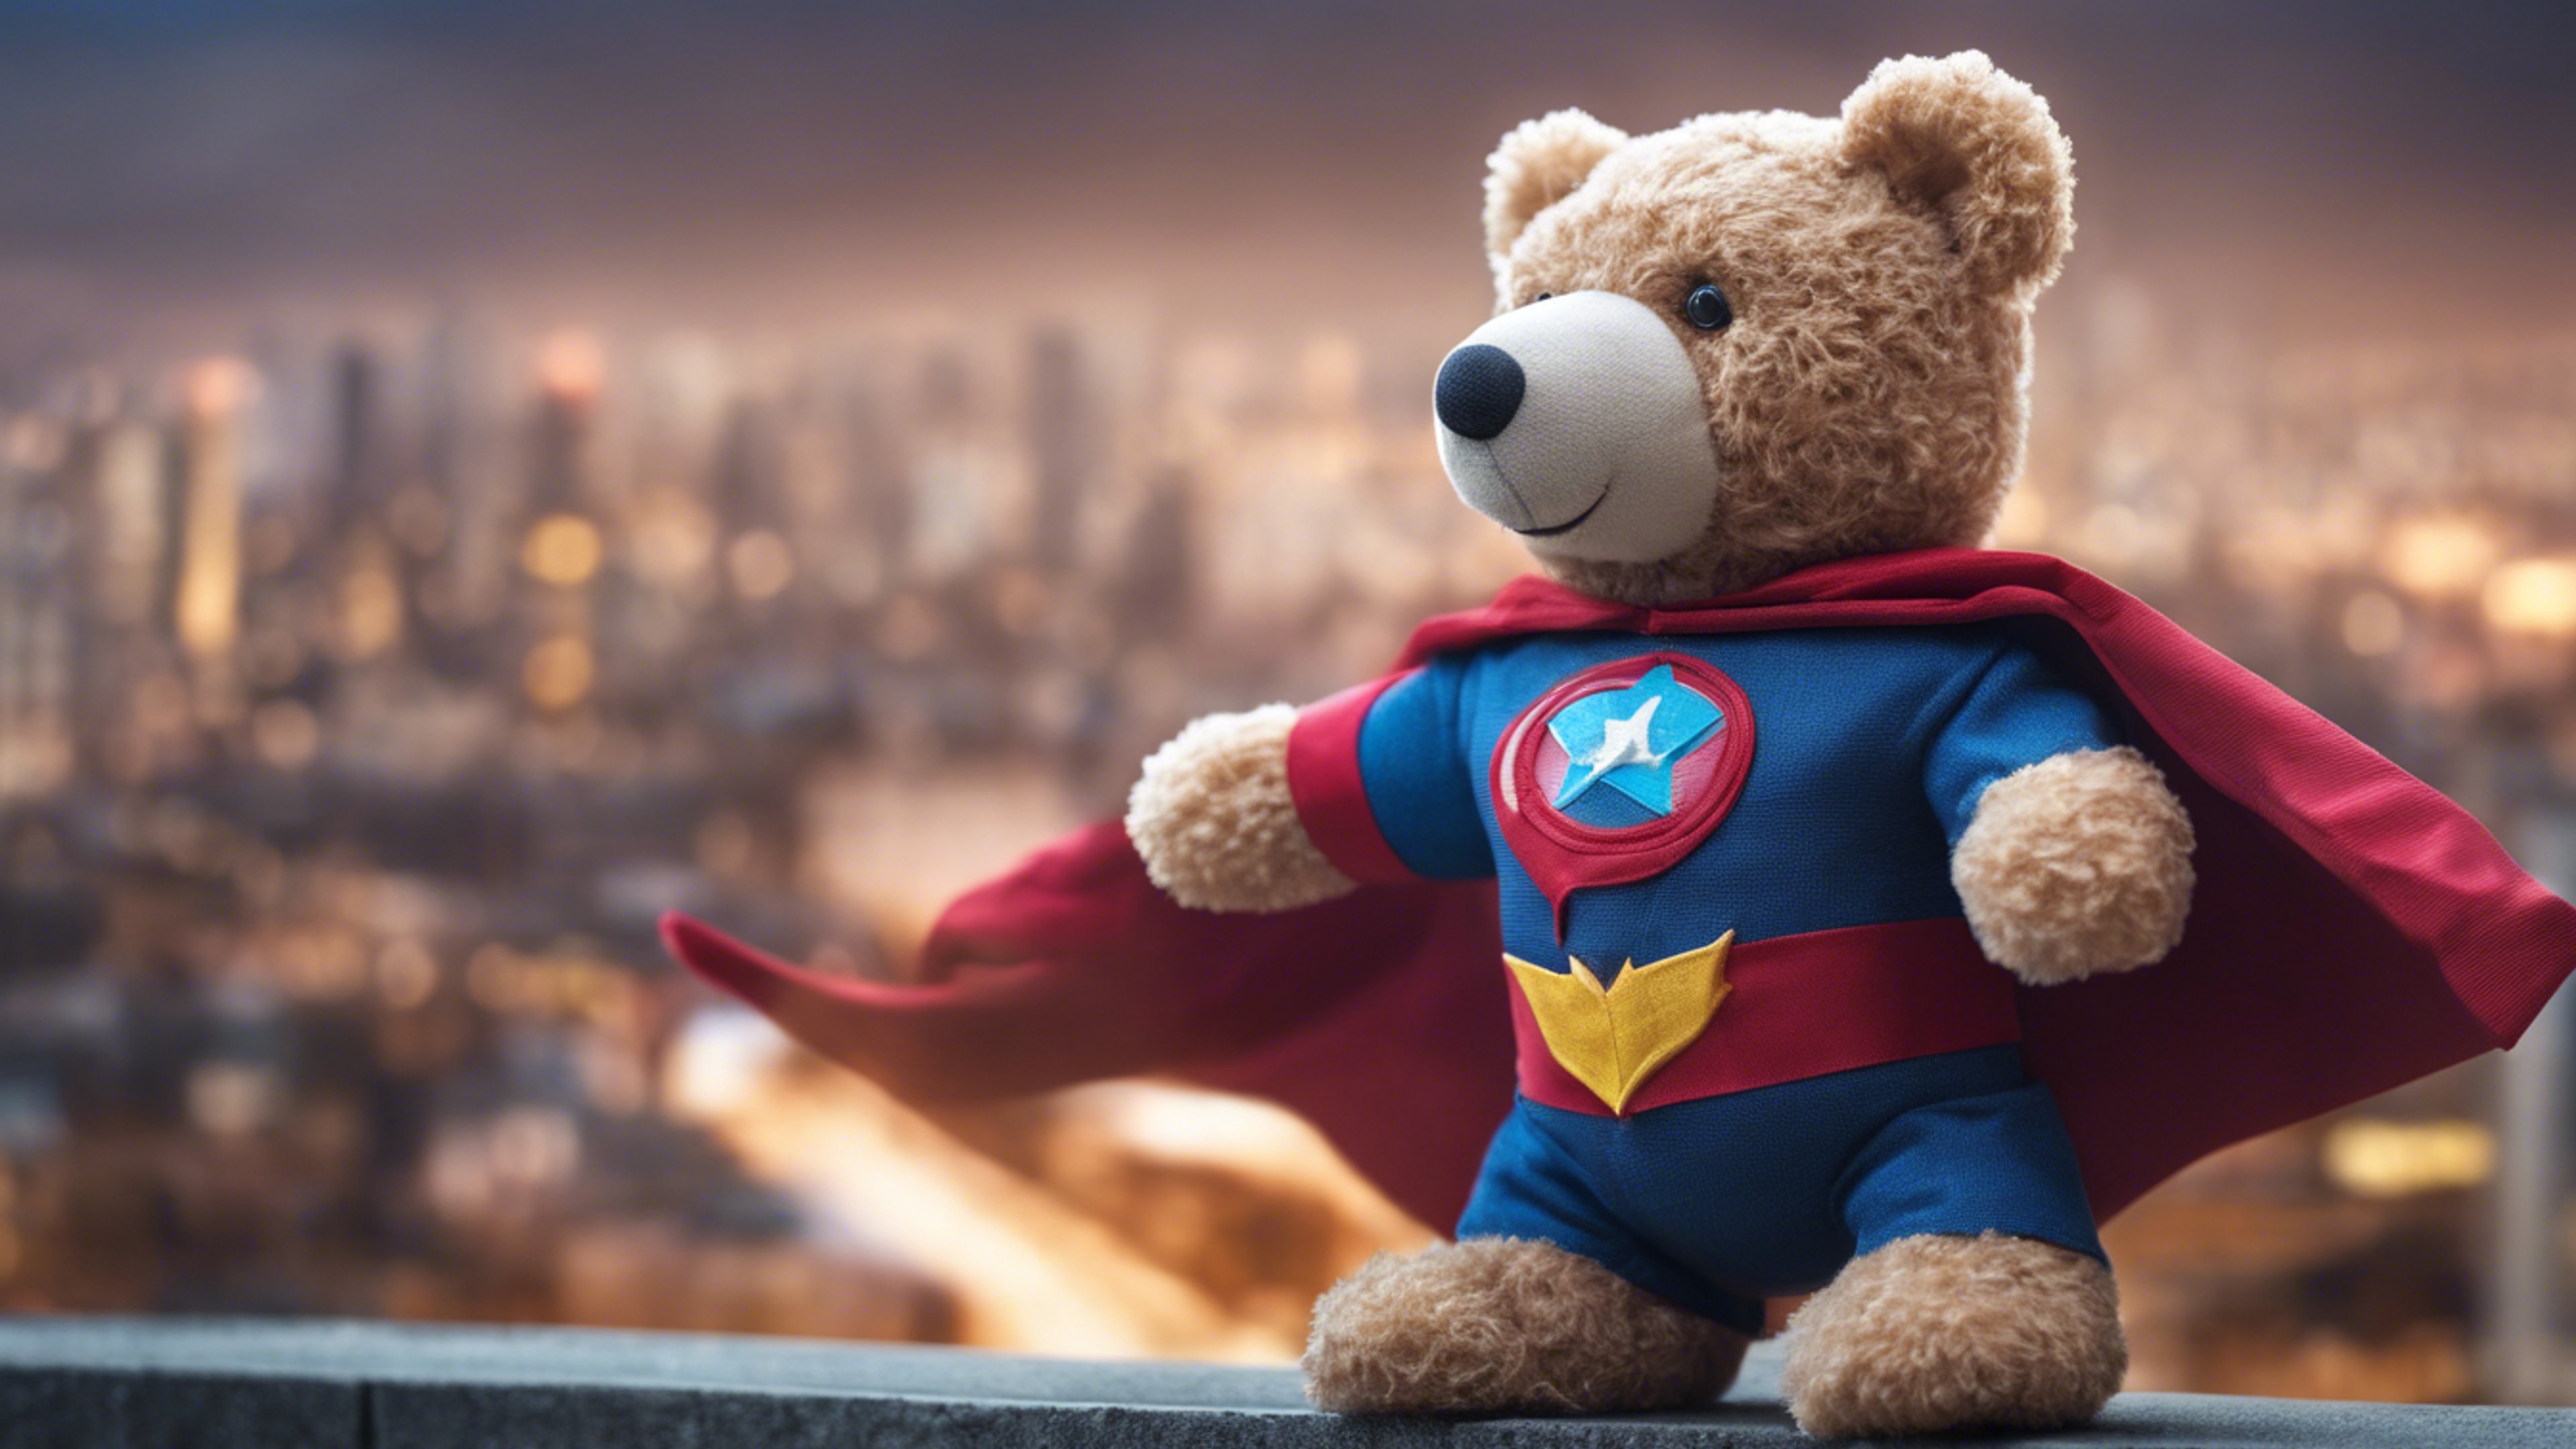 A teddy bear dressed as a superhero, flying against a cityscape backdrop. Kertas dinding[ad961830169c4aee84e3]